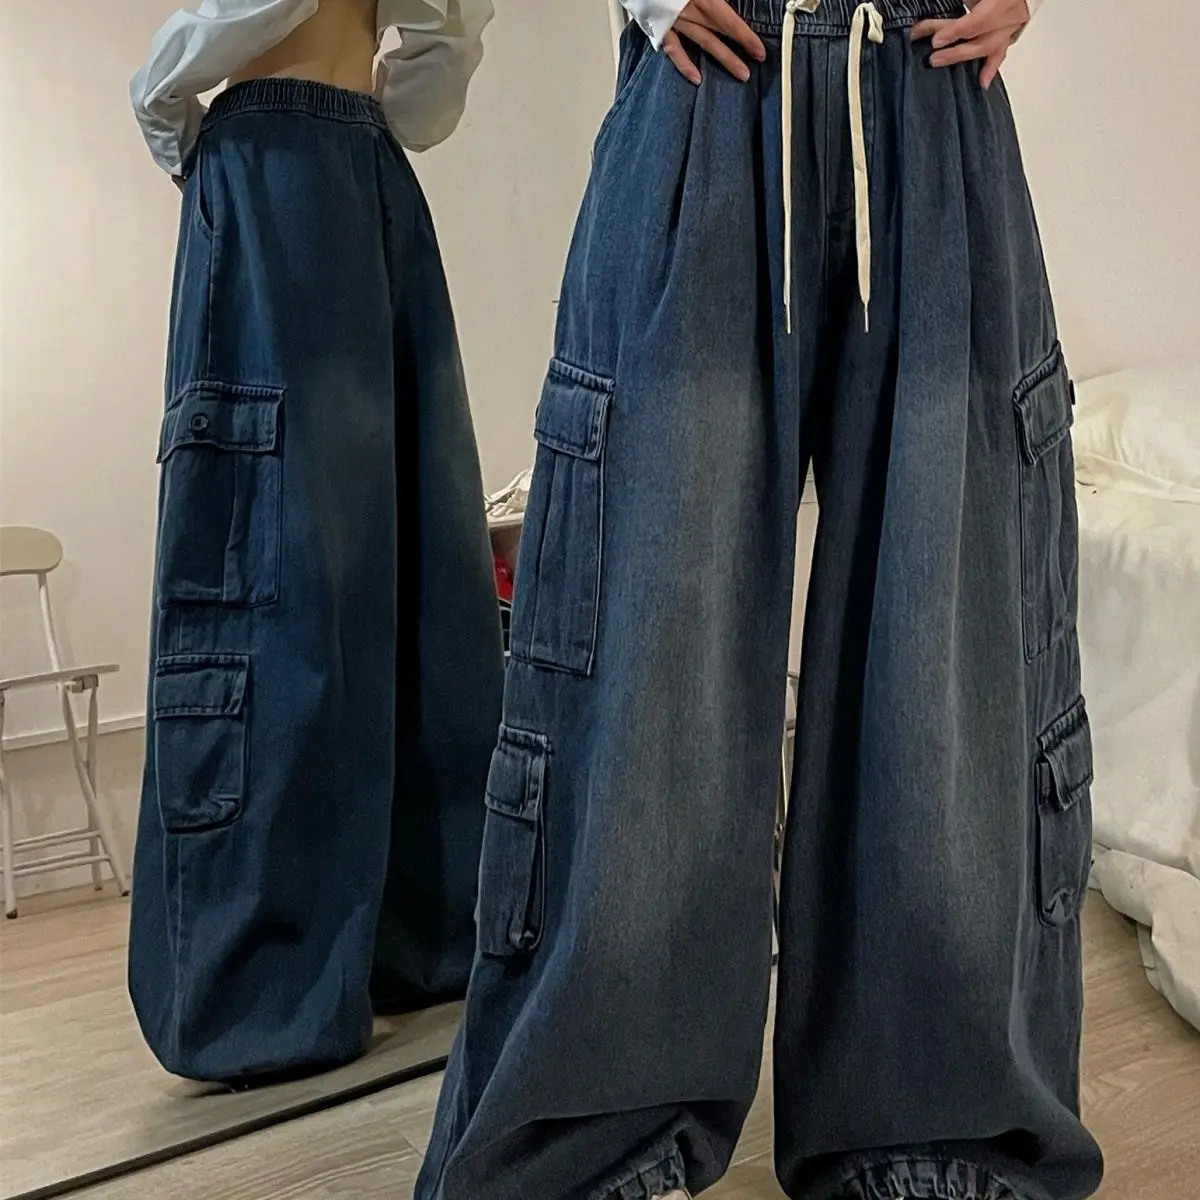 

Spring and Autumn Both Sexes Cool Drag Street Hiphop Hip-hop Y2k Pants Cowboy Frock American Retro LaxWide-leg Pants Trendy